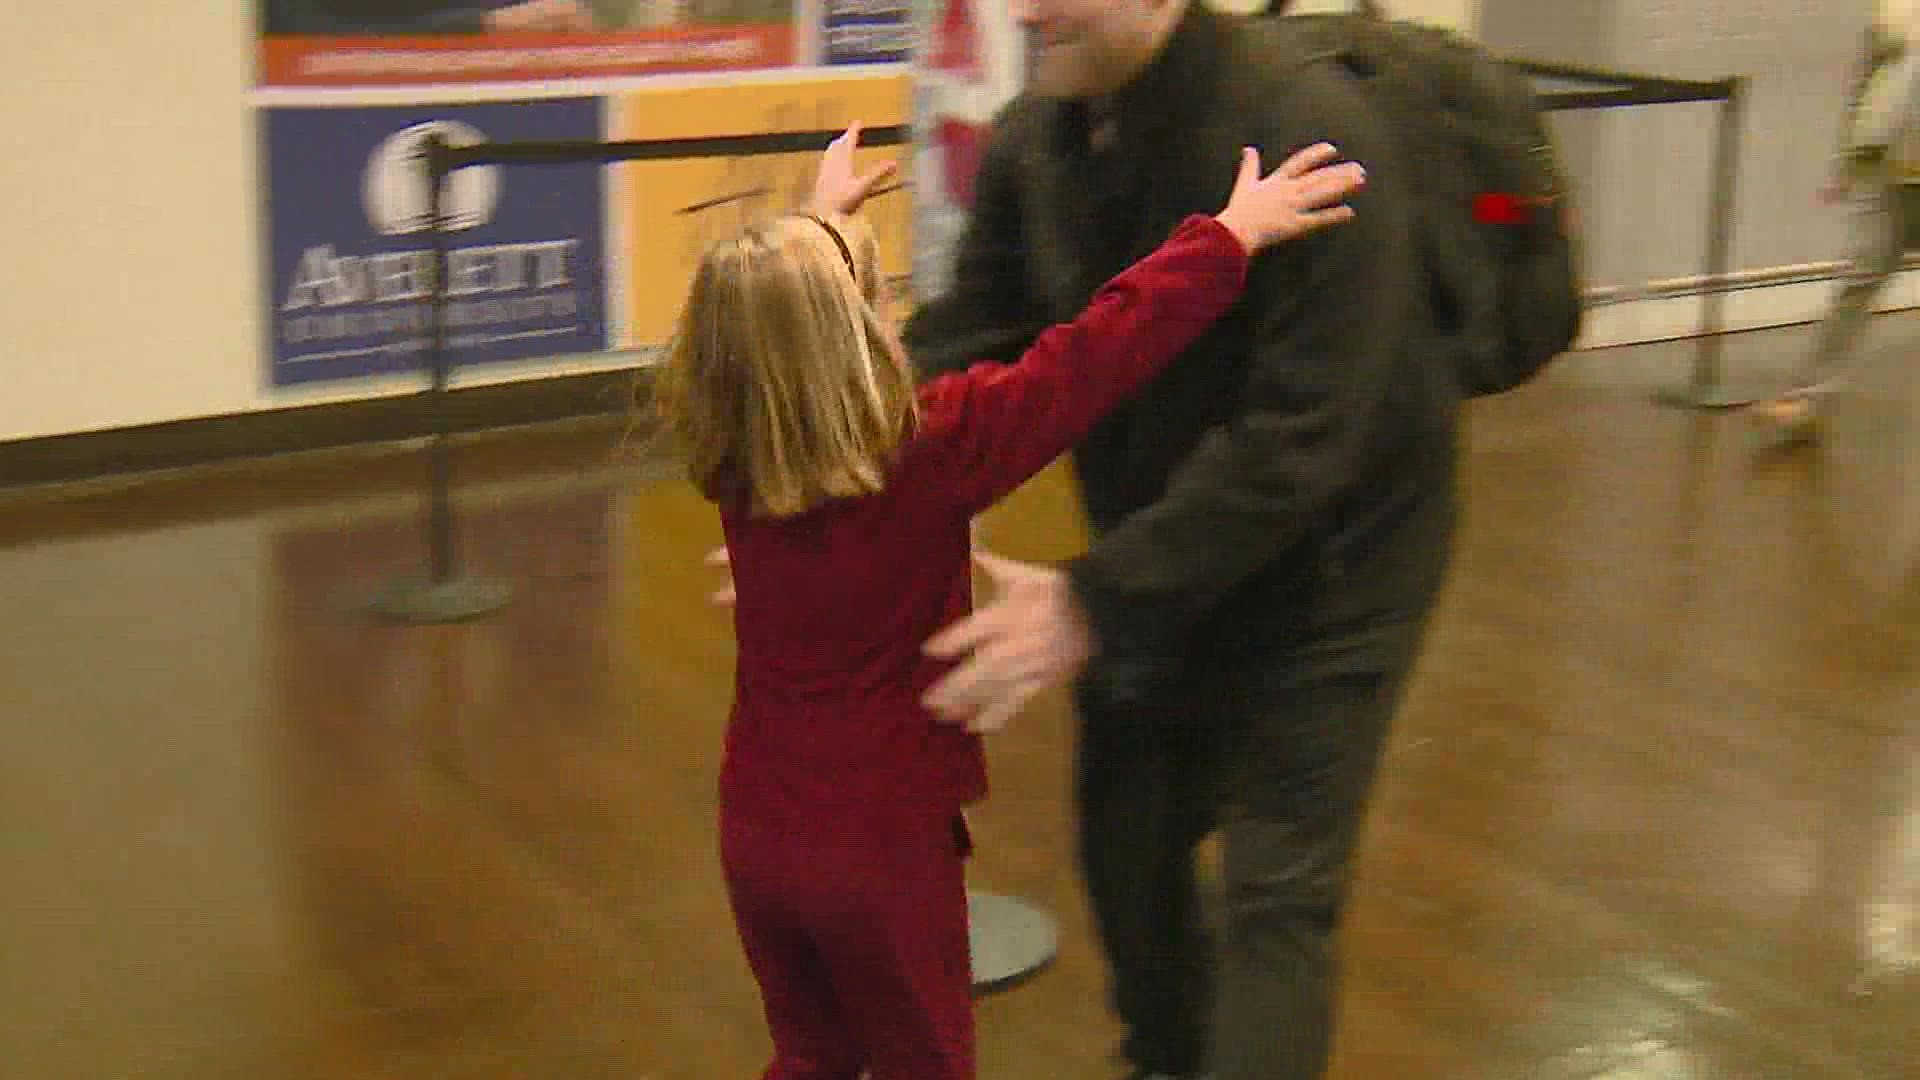 During the busiest travel day of the year, families reunite in airports across the country.